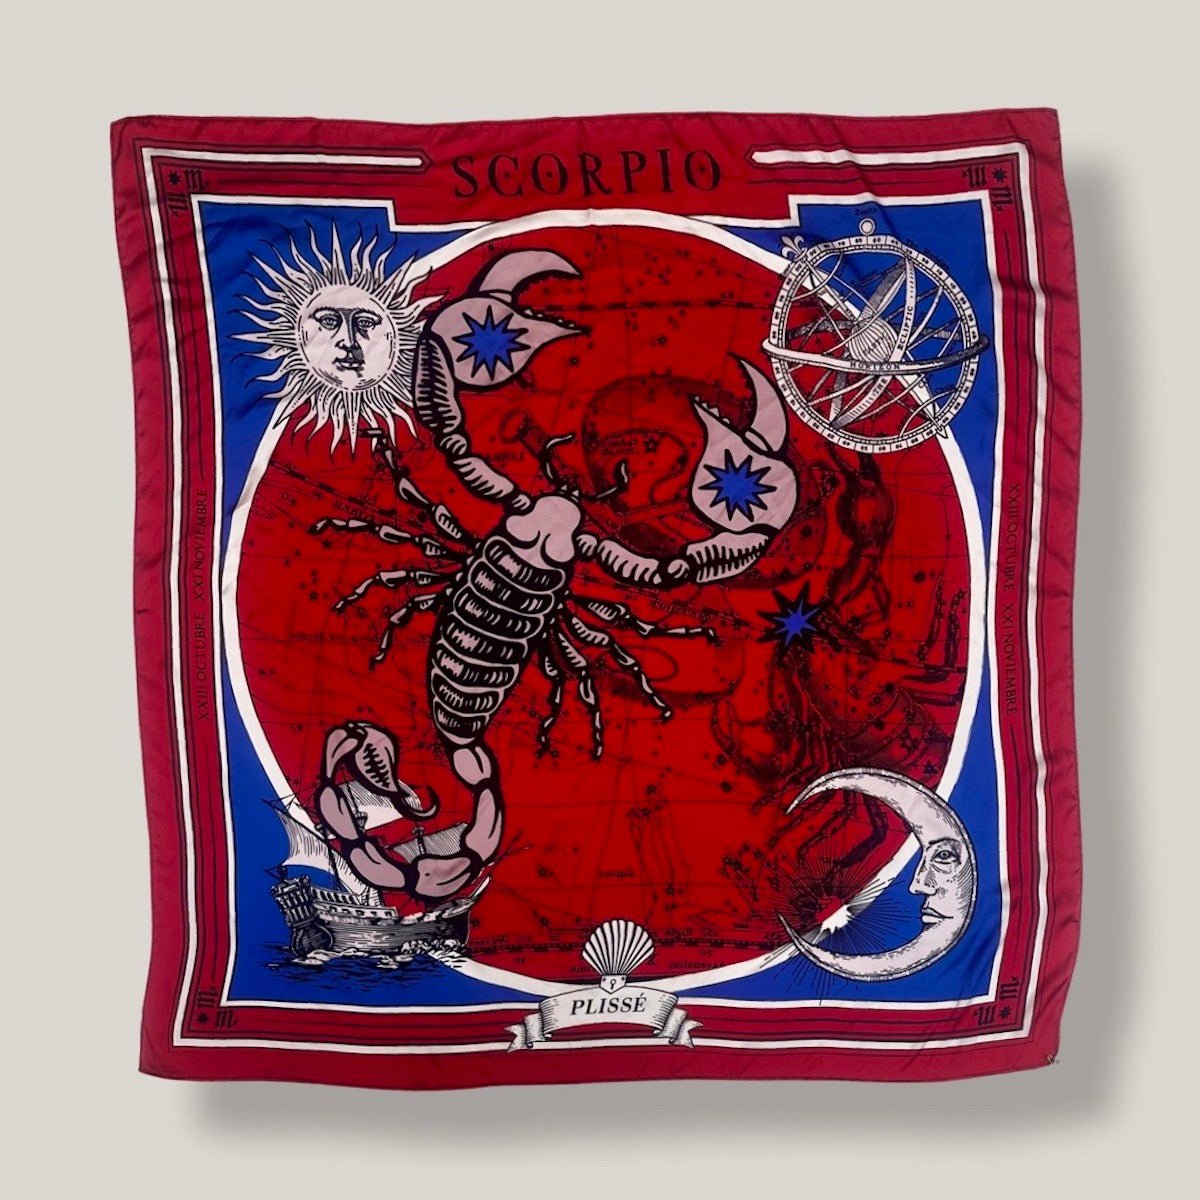 Red scorpio scarf by Plissé. Image of a scorpion, with sun and moon on corners. The scarf is pictured on plain white background.